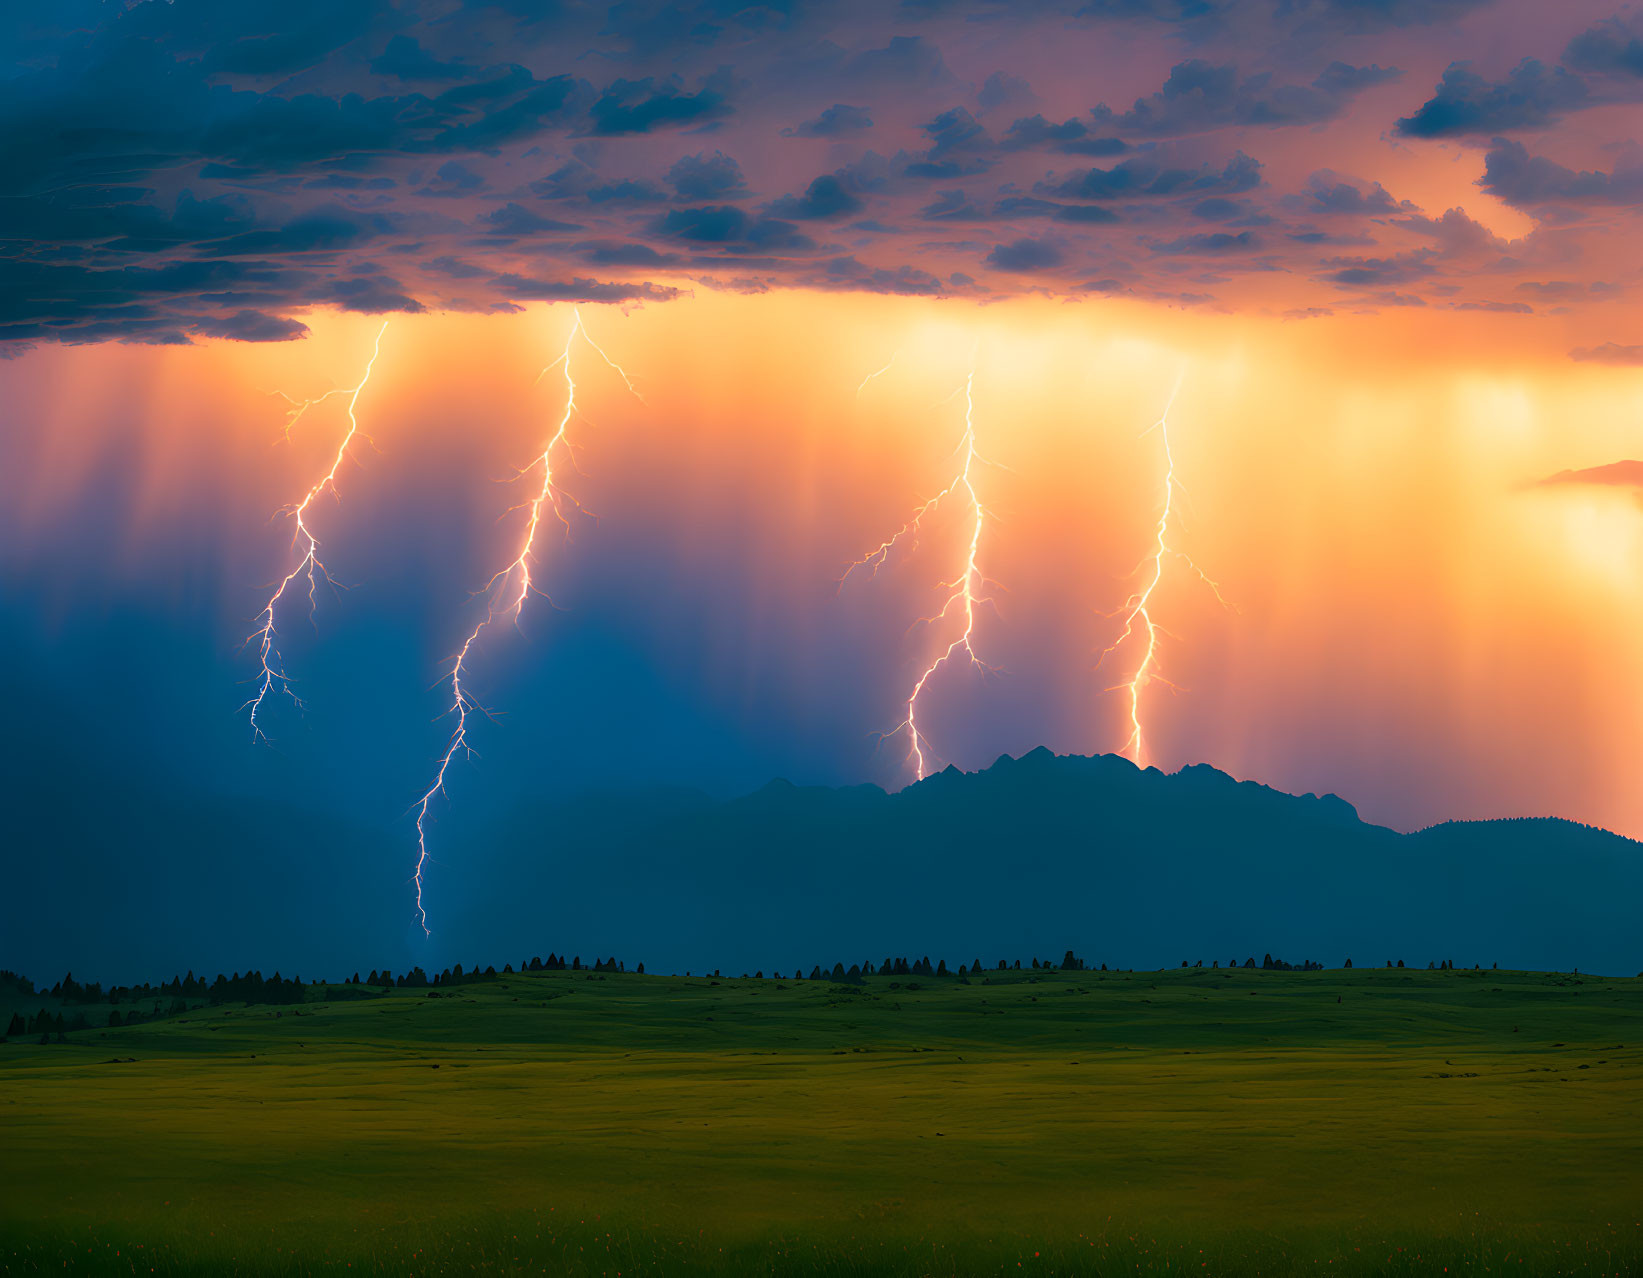 Dramatic landscape with lightning strikes above mountains and green field